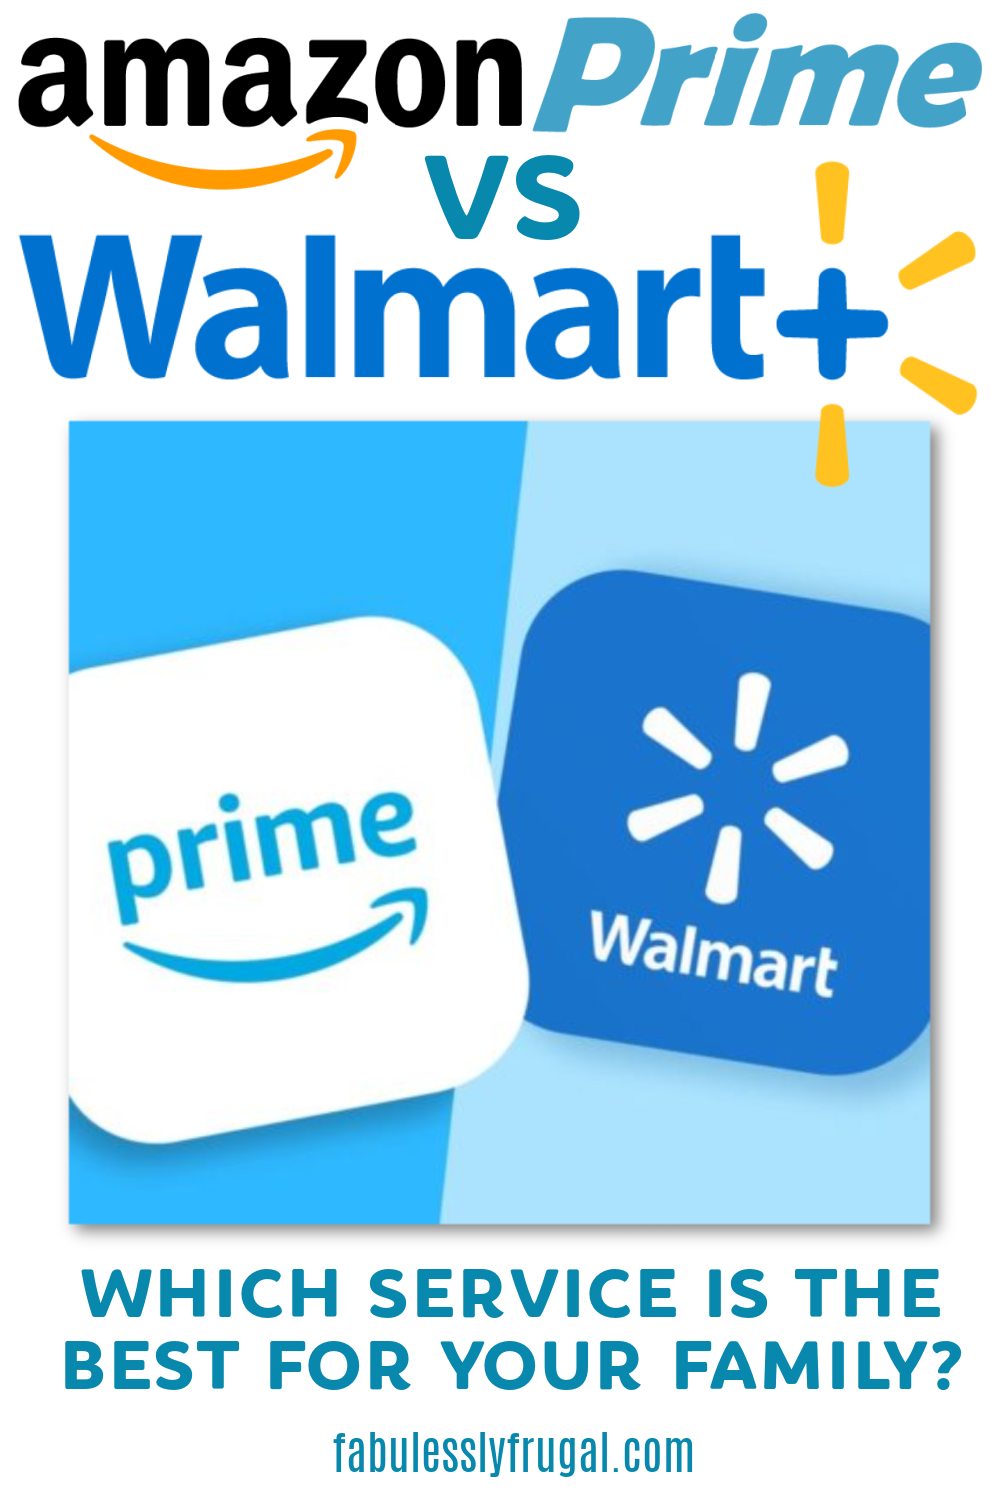 https://fabulesslyfrugal.com/wp-content/uploads/2021/03/amazon-prime-vs.-walmart-for-family-FINAL.png